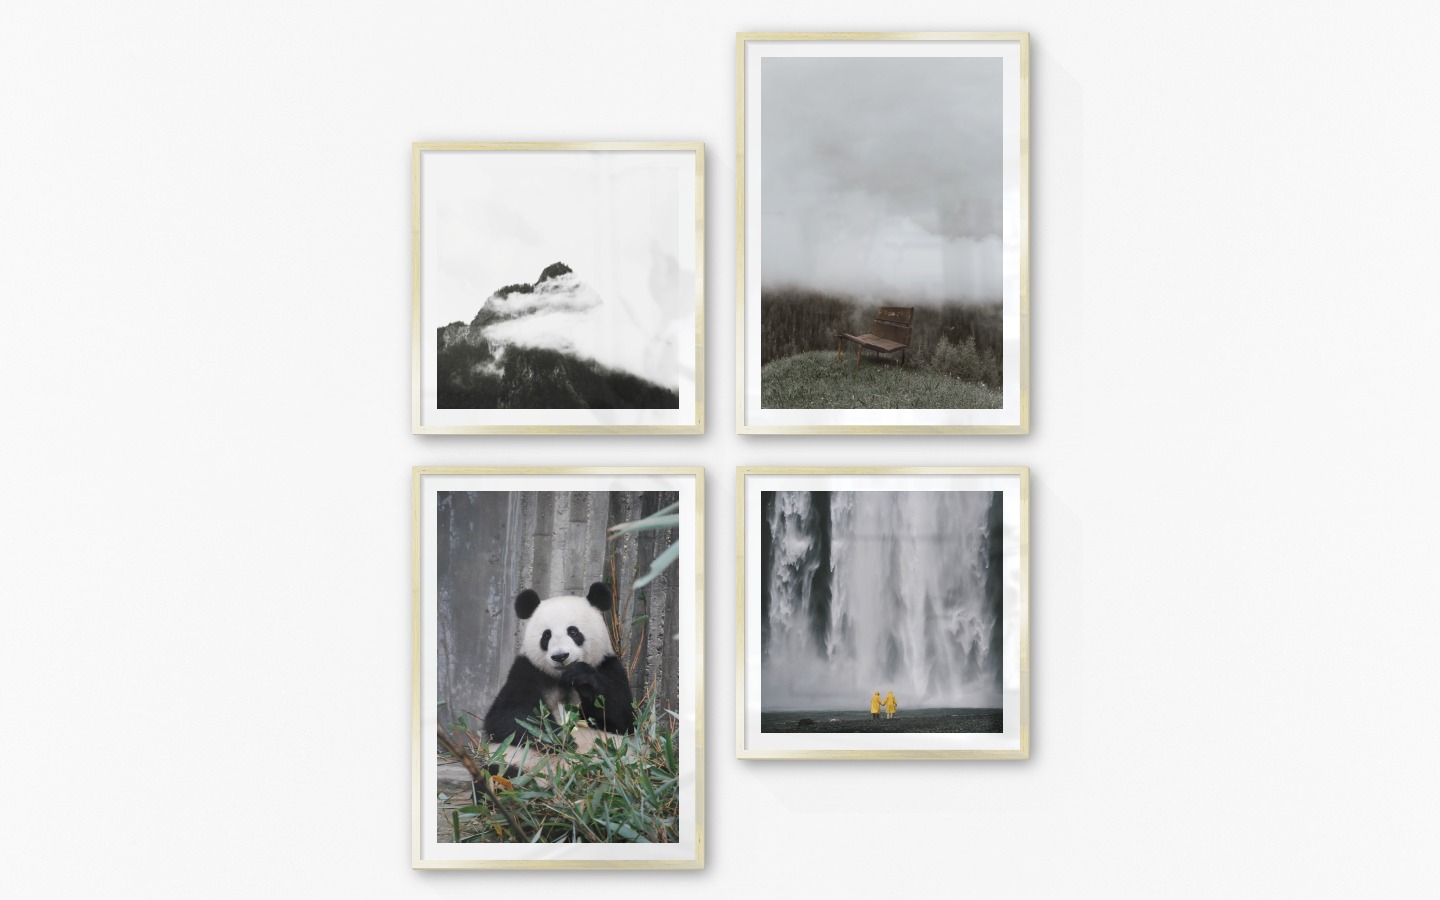 Gallery wall with picture frames in gold in sizes 50x50 and 50x70 with prints "Mountain peaks in fog", "Bench in misty nature", "Panda" and "Waterfall with people"